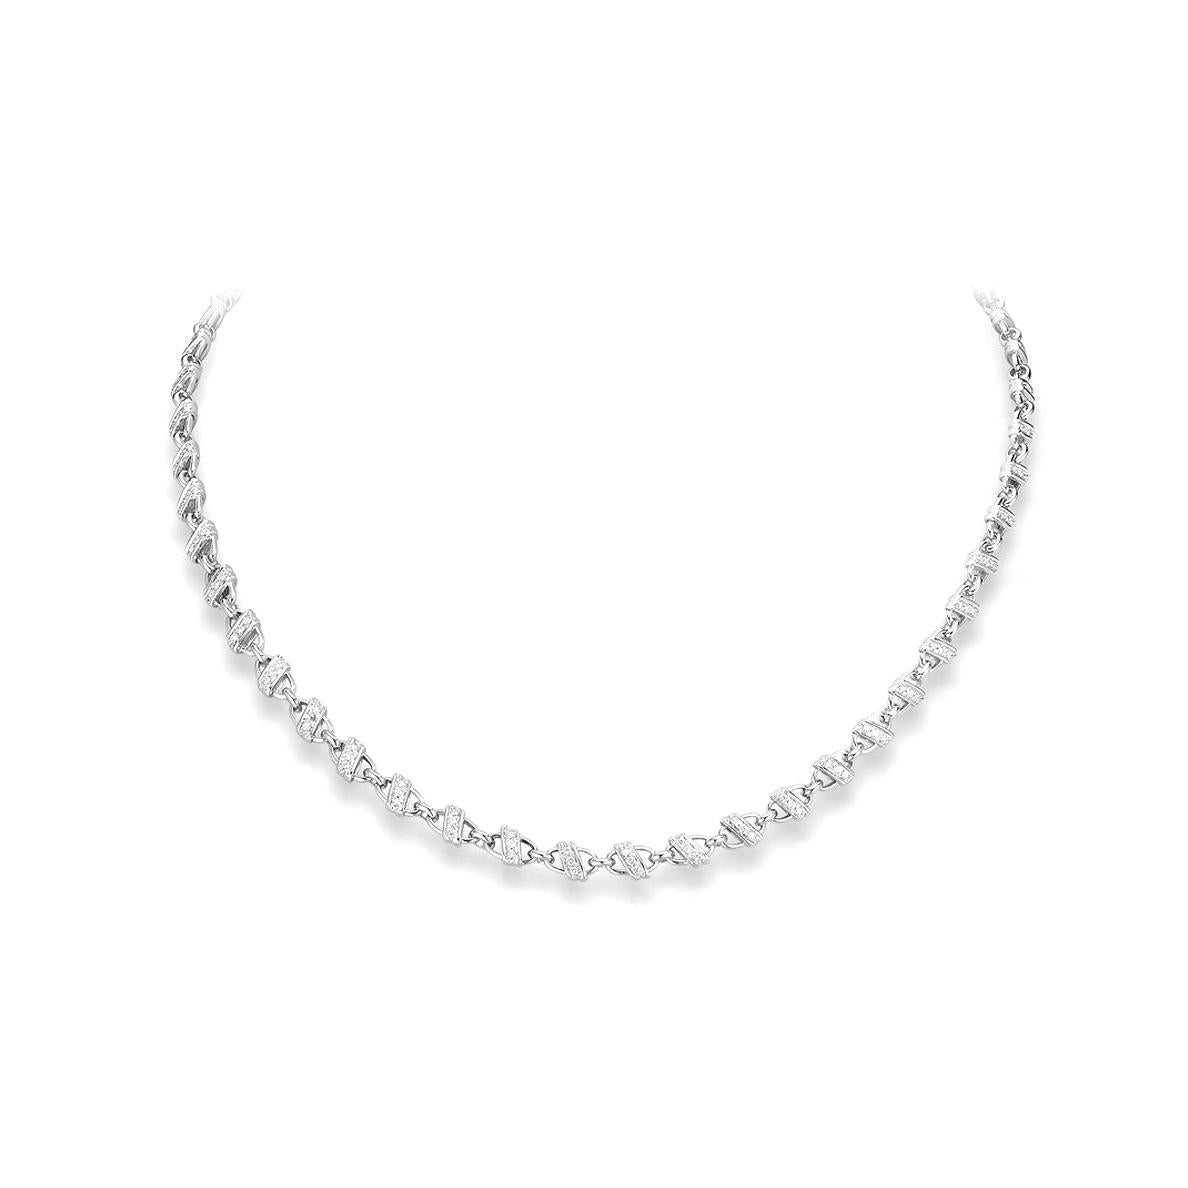 Necklace in 18kt white gold set with 144 diamonds 1.14 cts